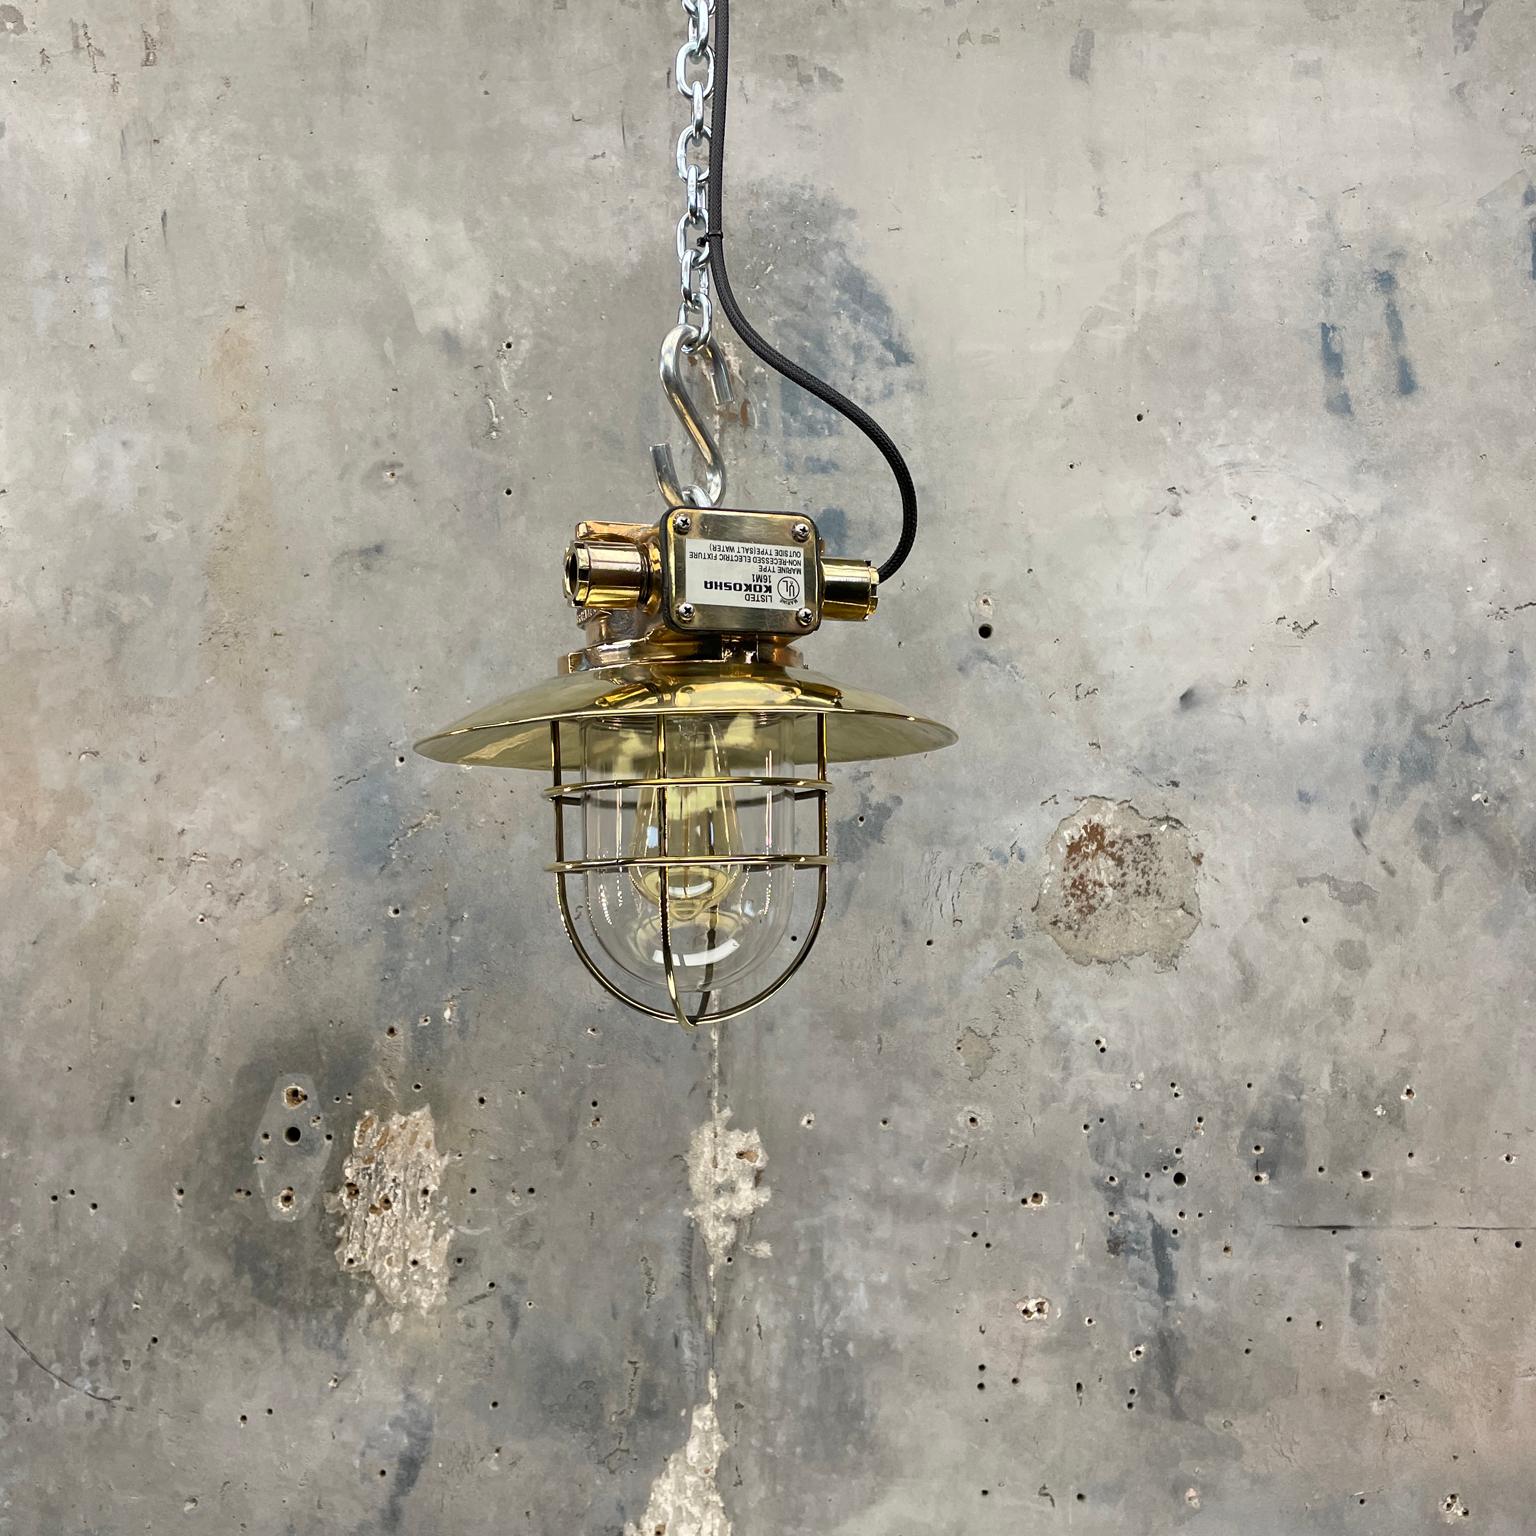 1980s Japanese Bronze Industrial Ceiling Light Brass Shade & Glass Dome U/L 11